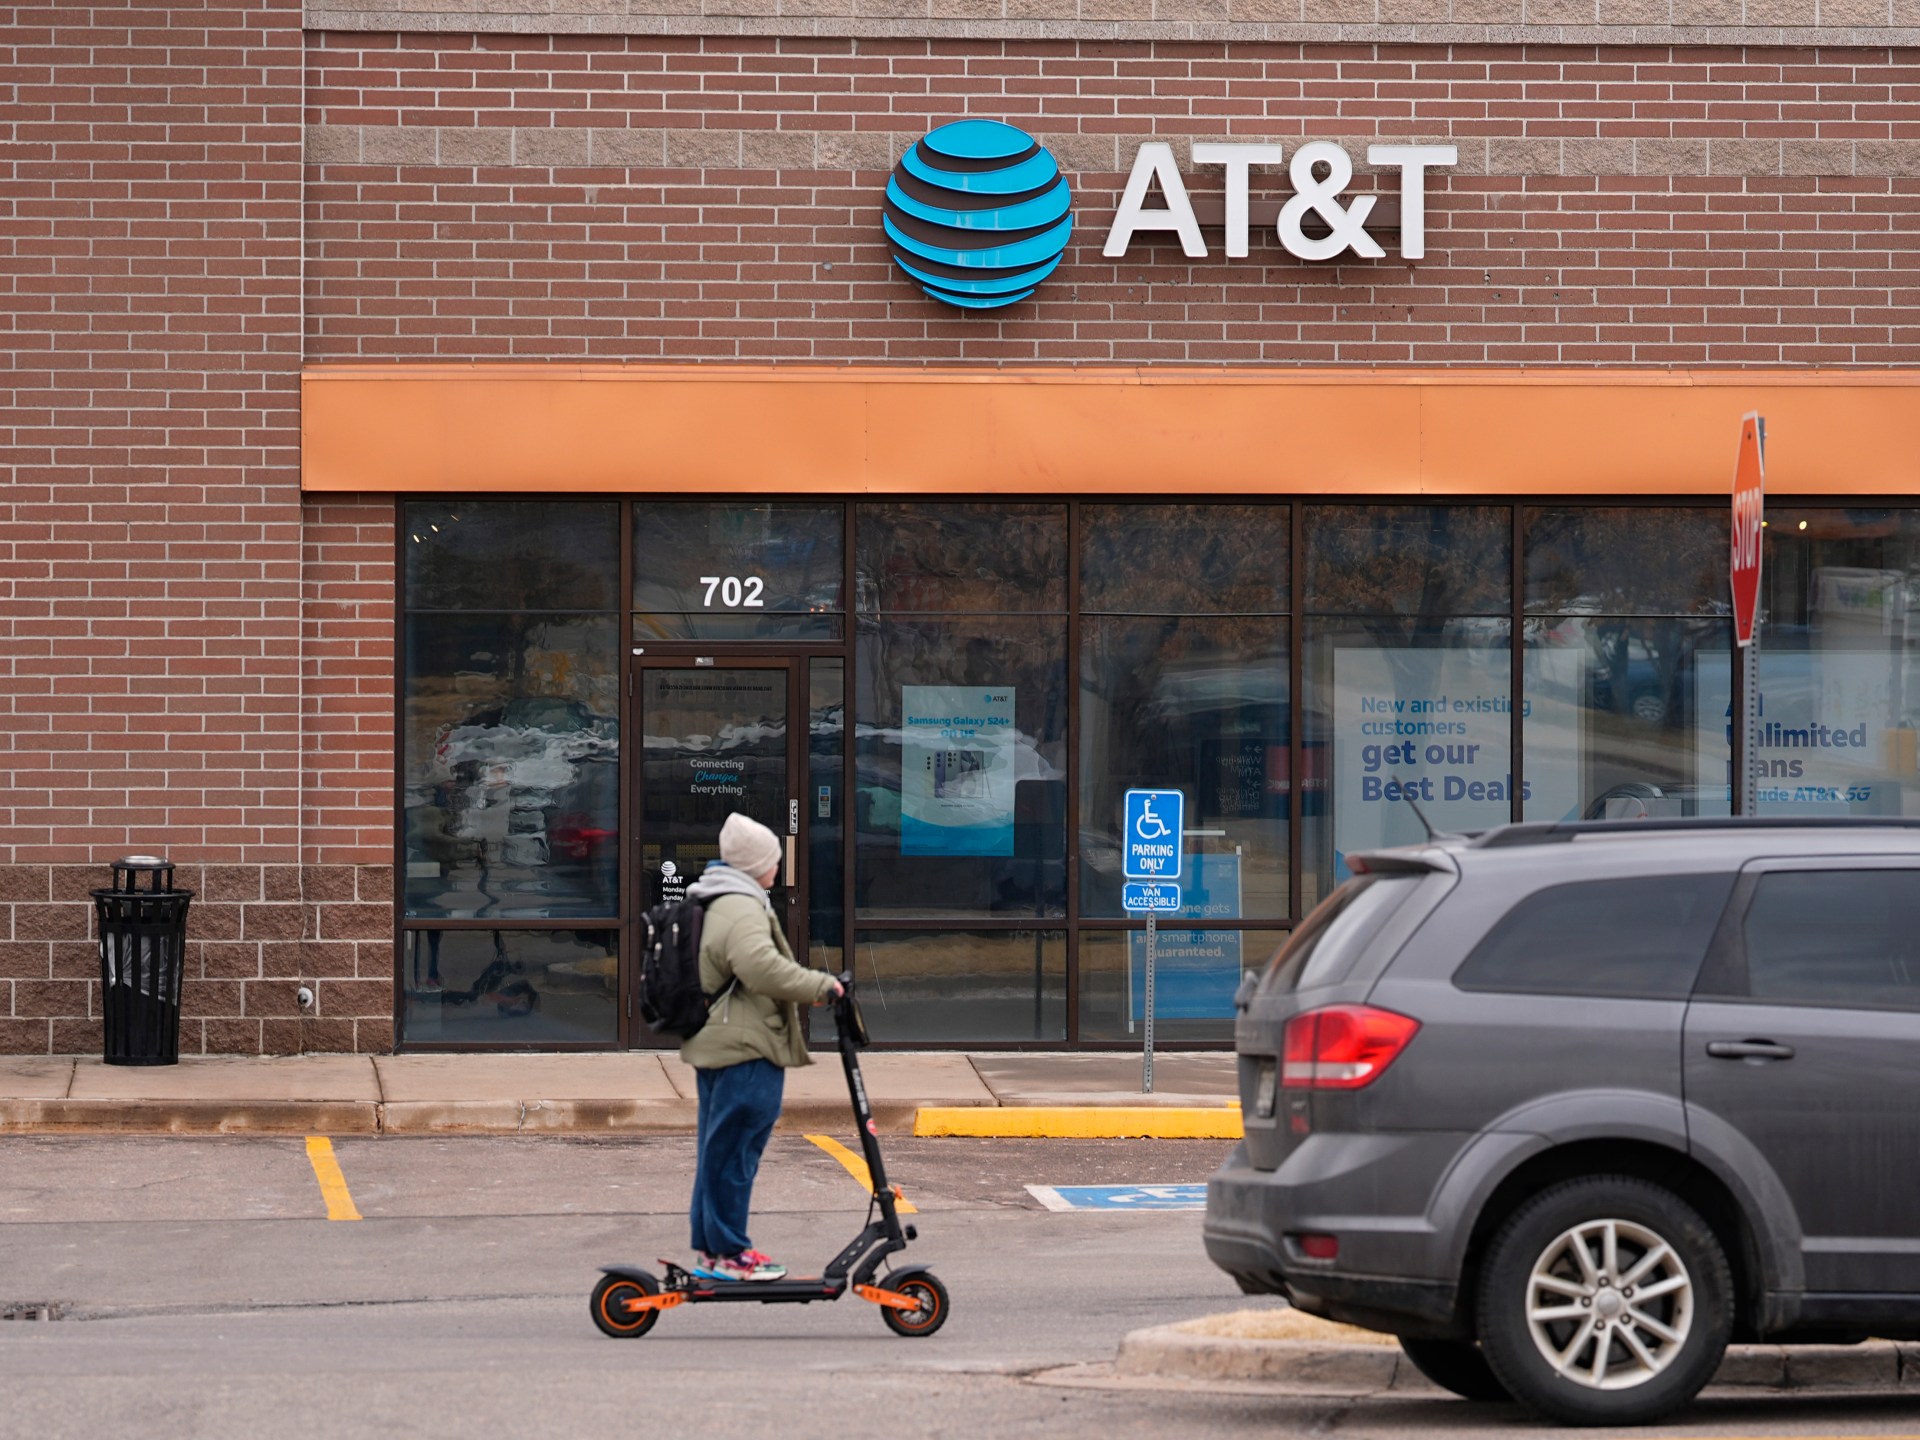 Data of nearly all AT&T customers downloaded in security breach | Cybersecurity News